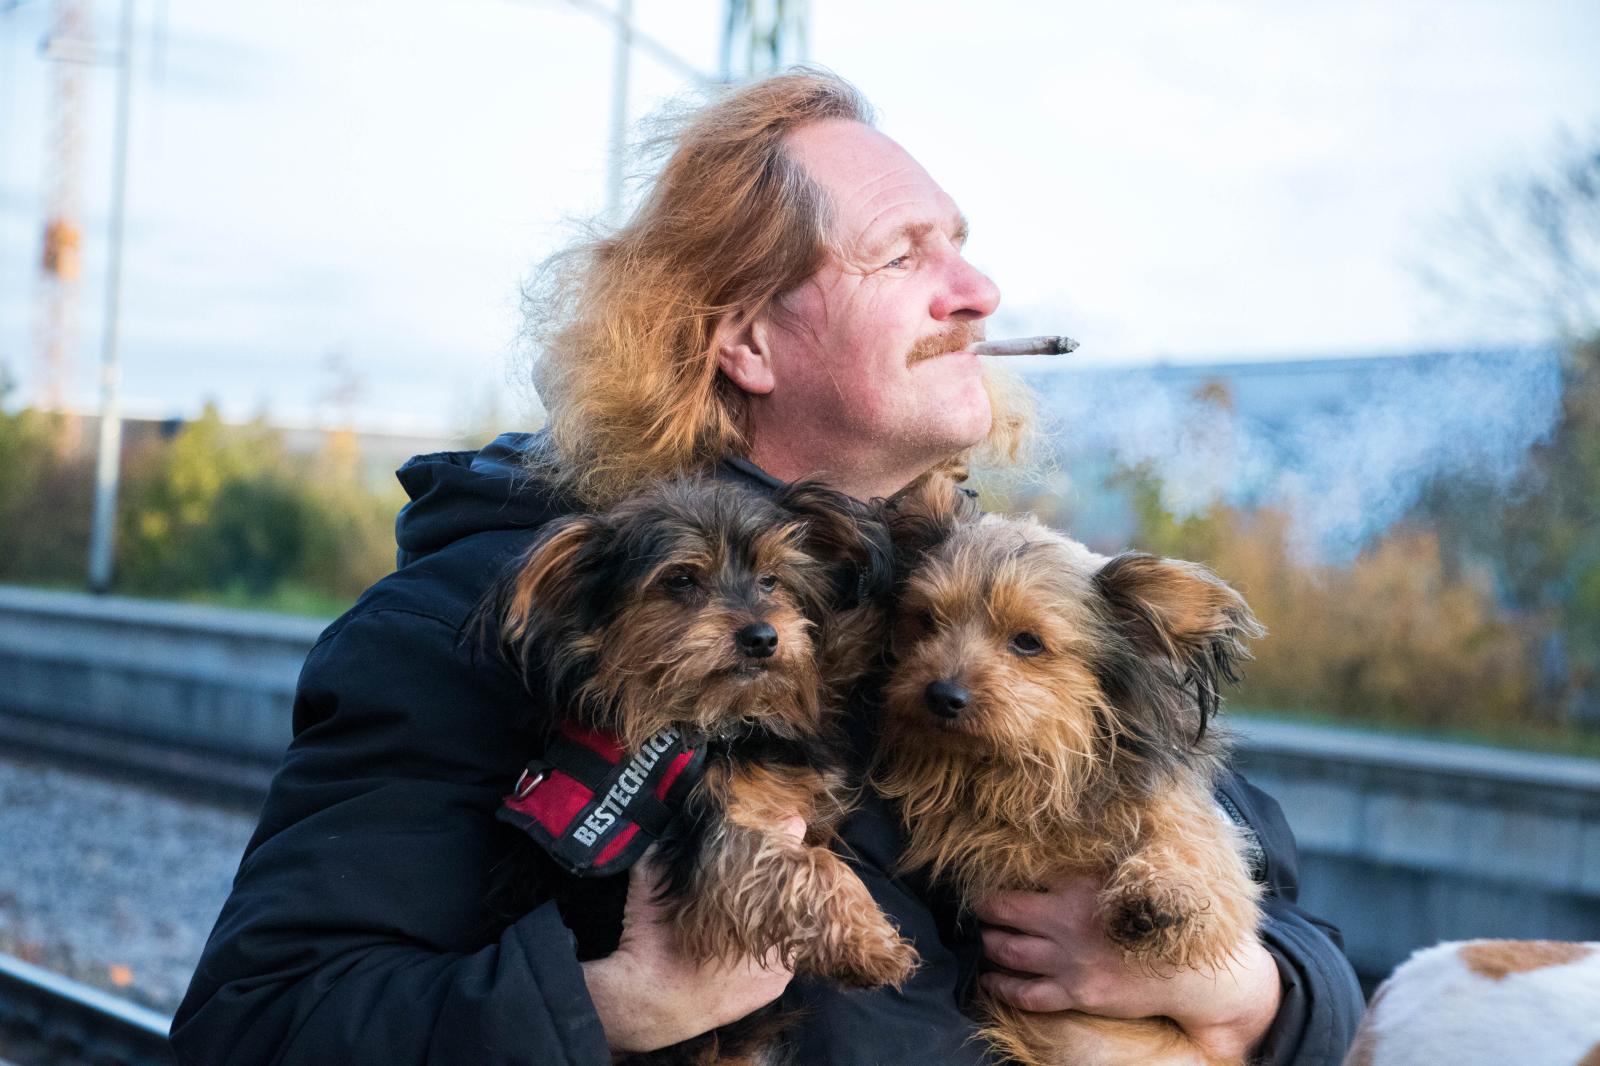 _Portraits - Holger and the doggos, Hannover (2019).